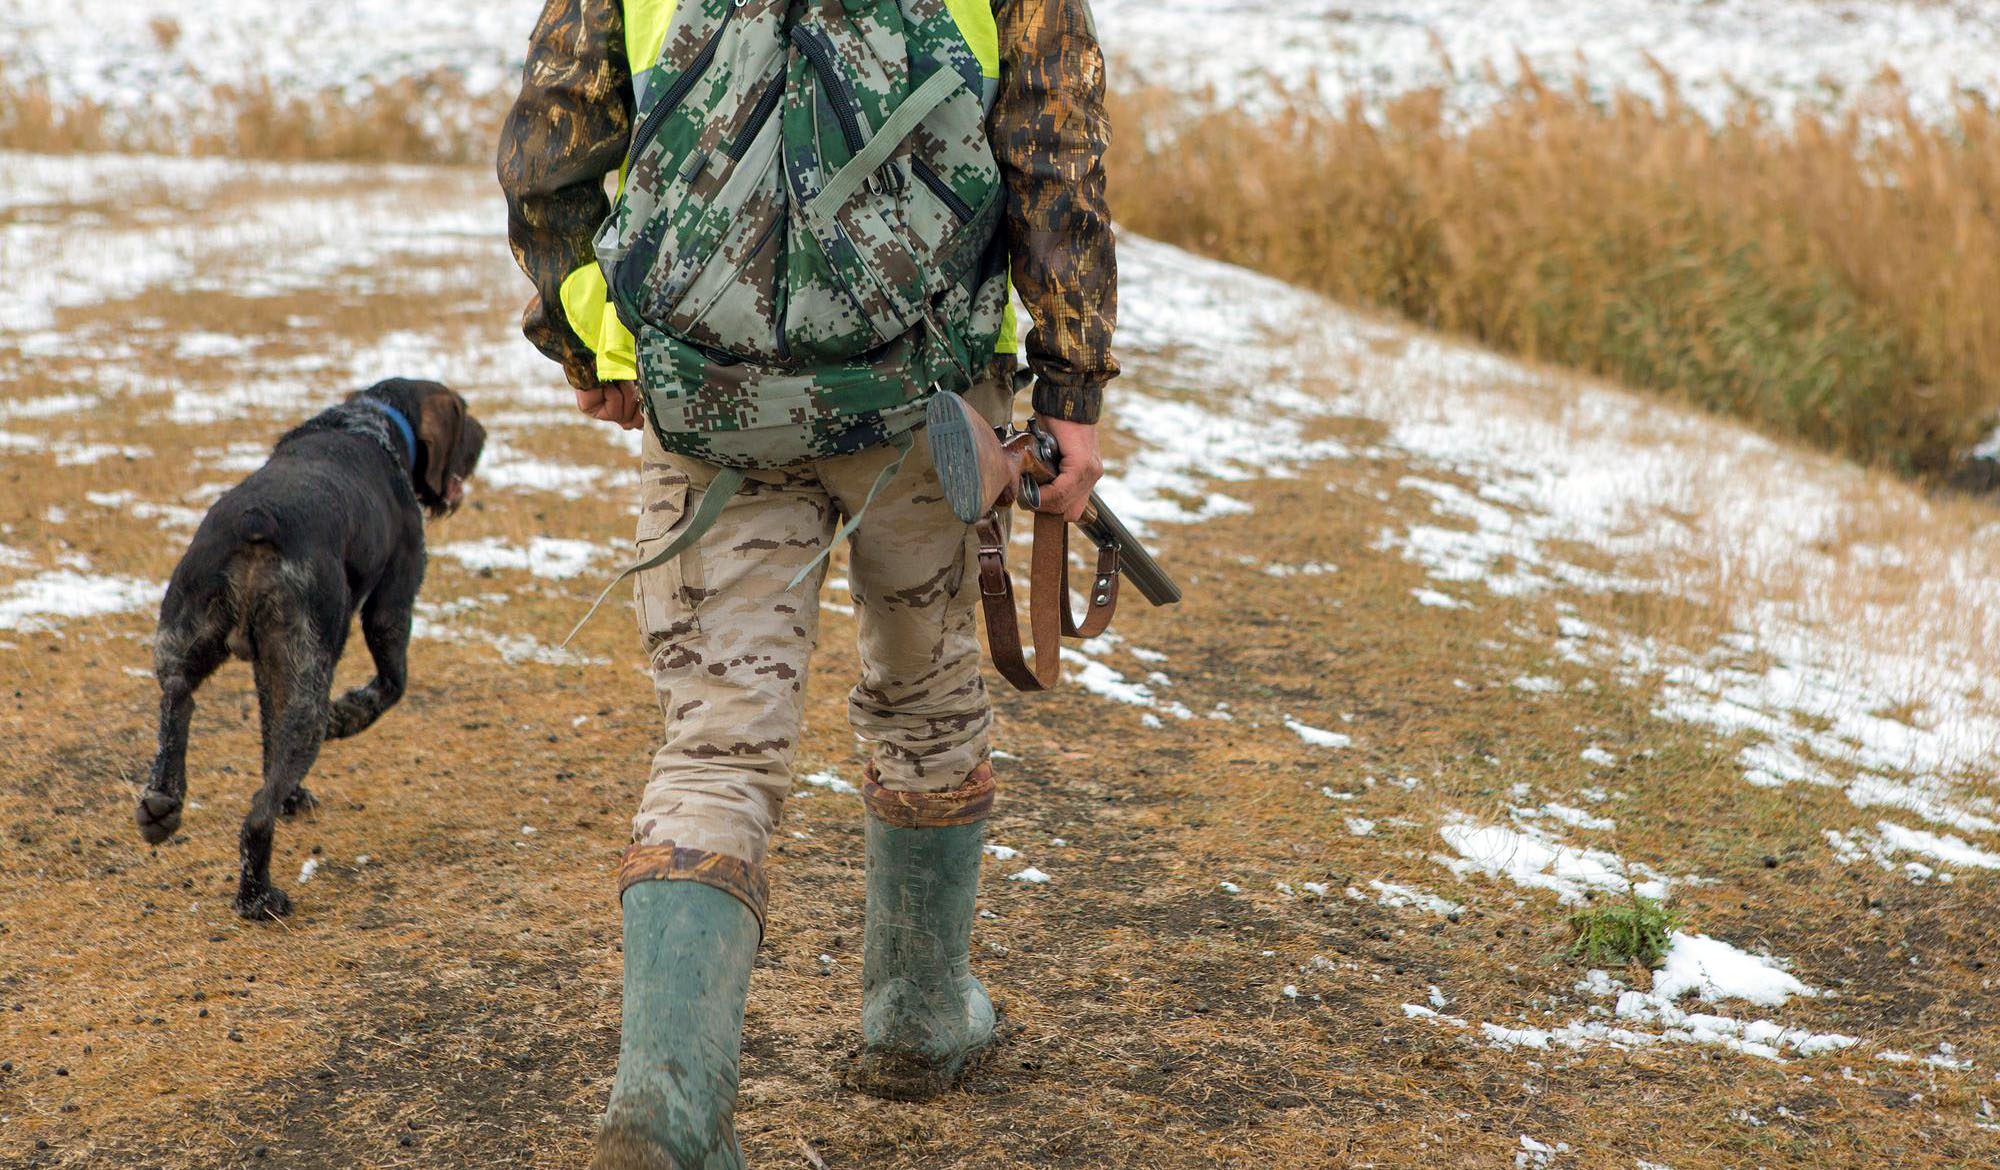 Warmest Hunting Boots for Sitting in a Tree Stand